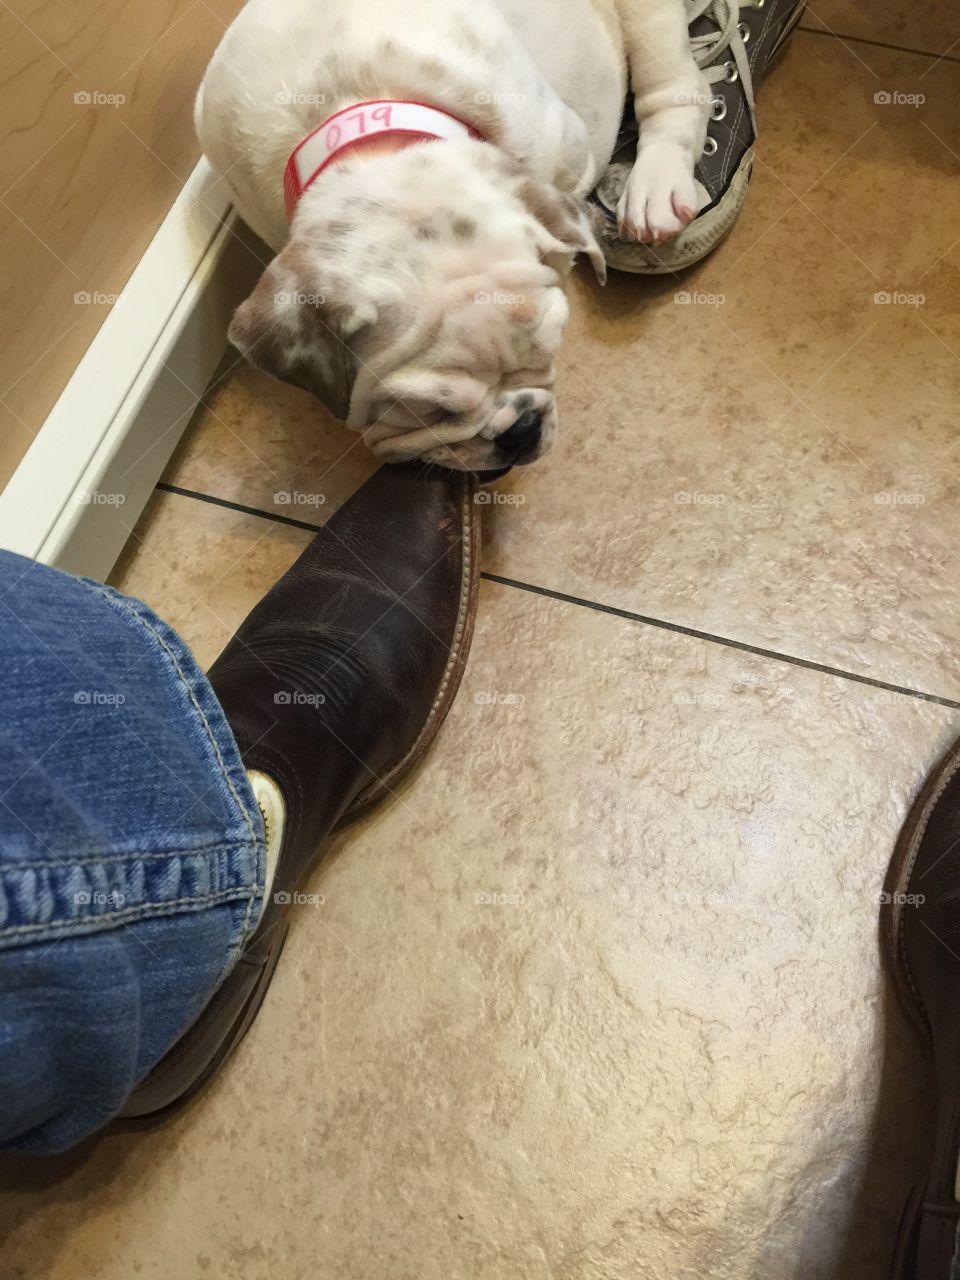 Bulldog puppy chewing on boots